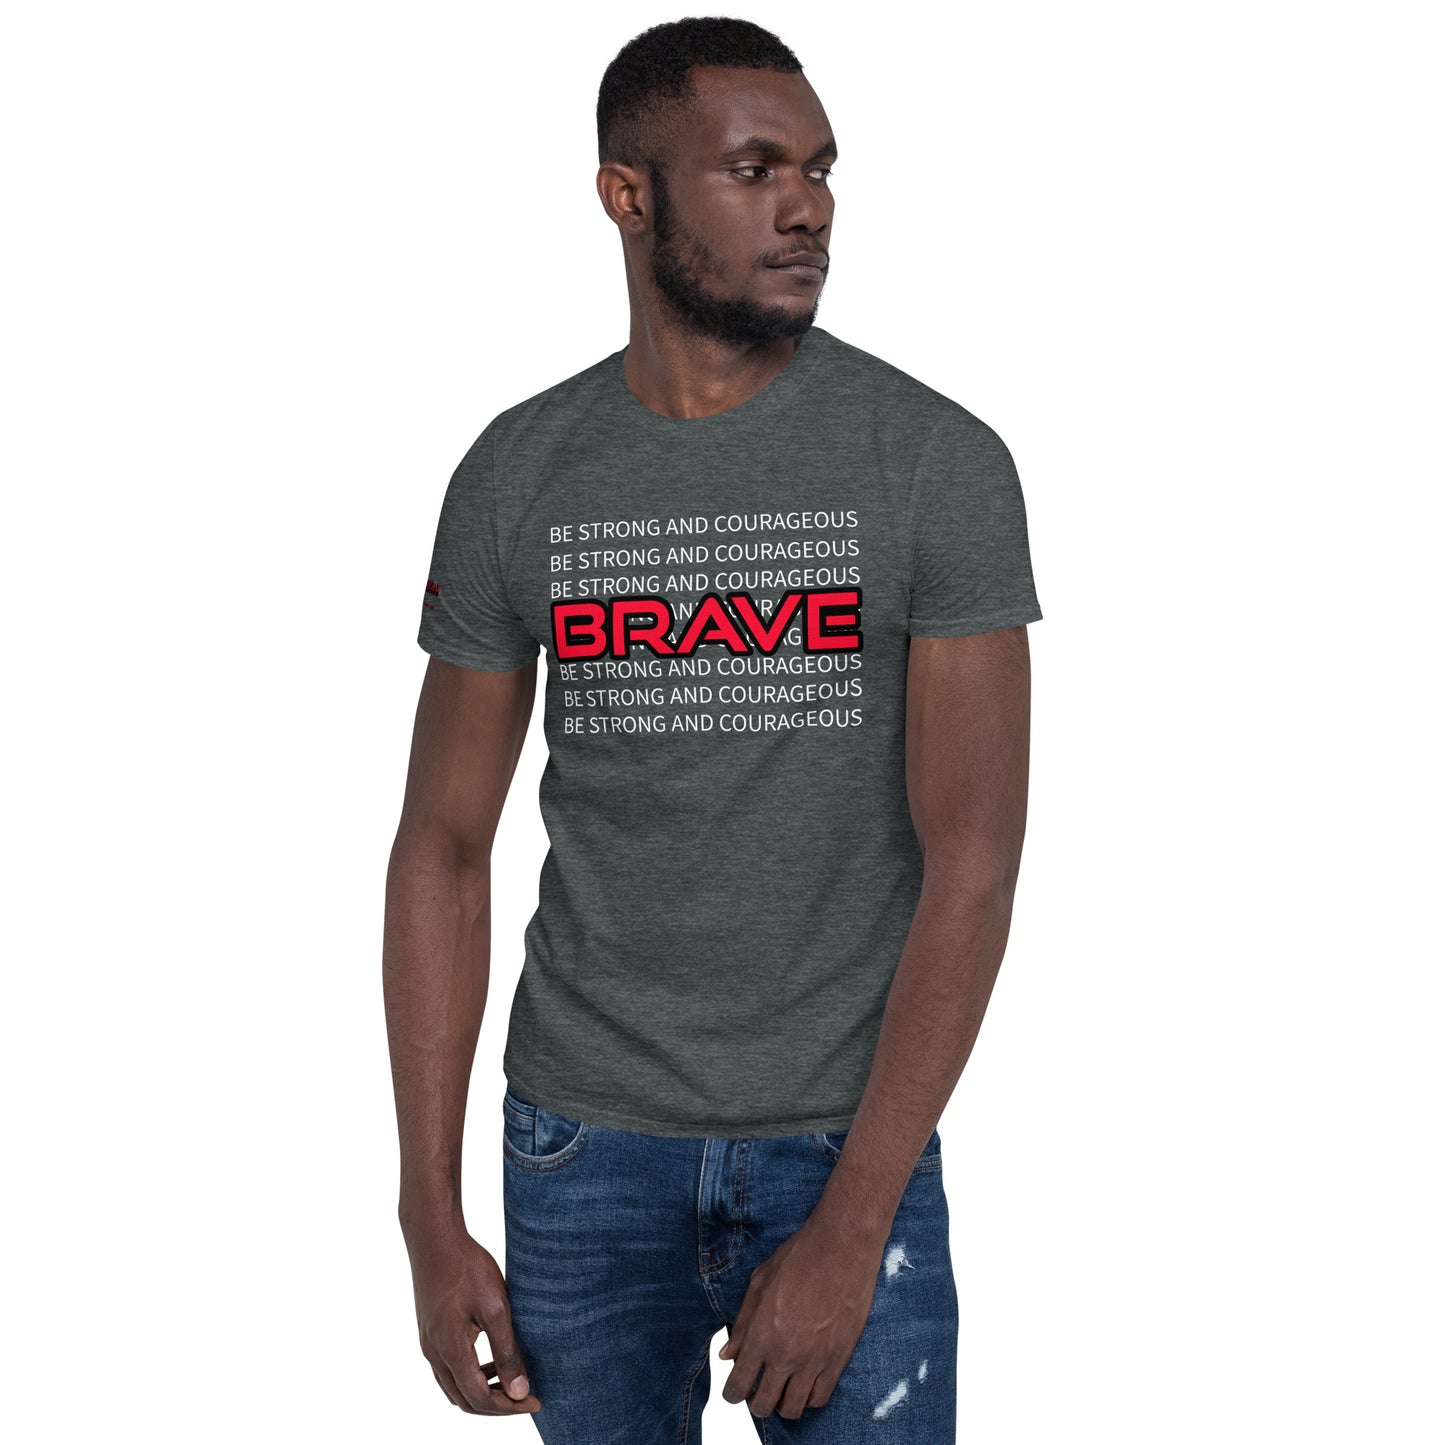 BE STRONG AND COURAGEOUS- Short-Sleeve Unisex T-Shirt